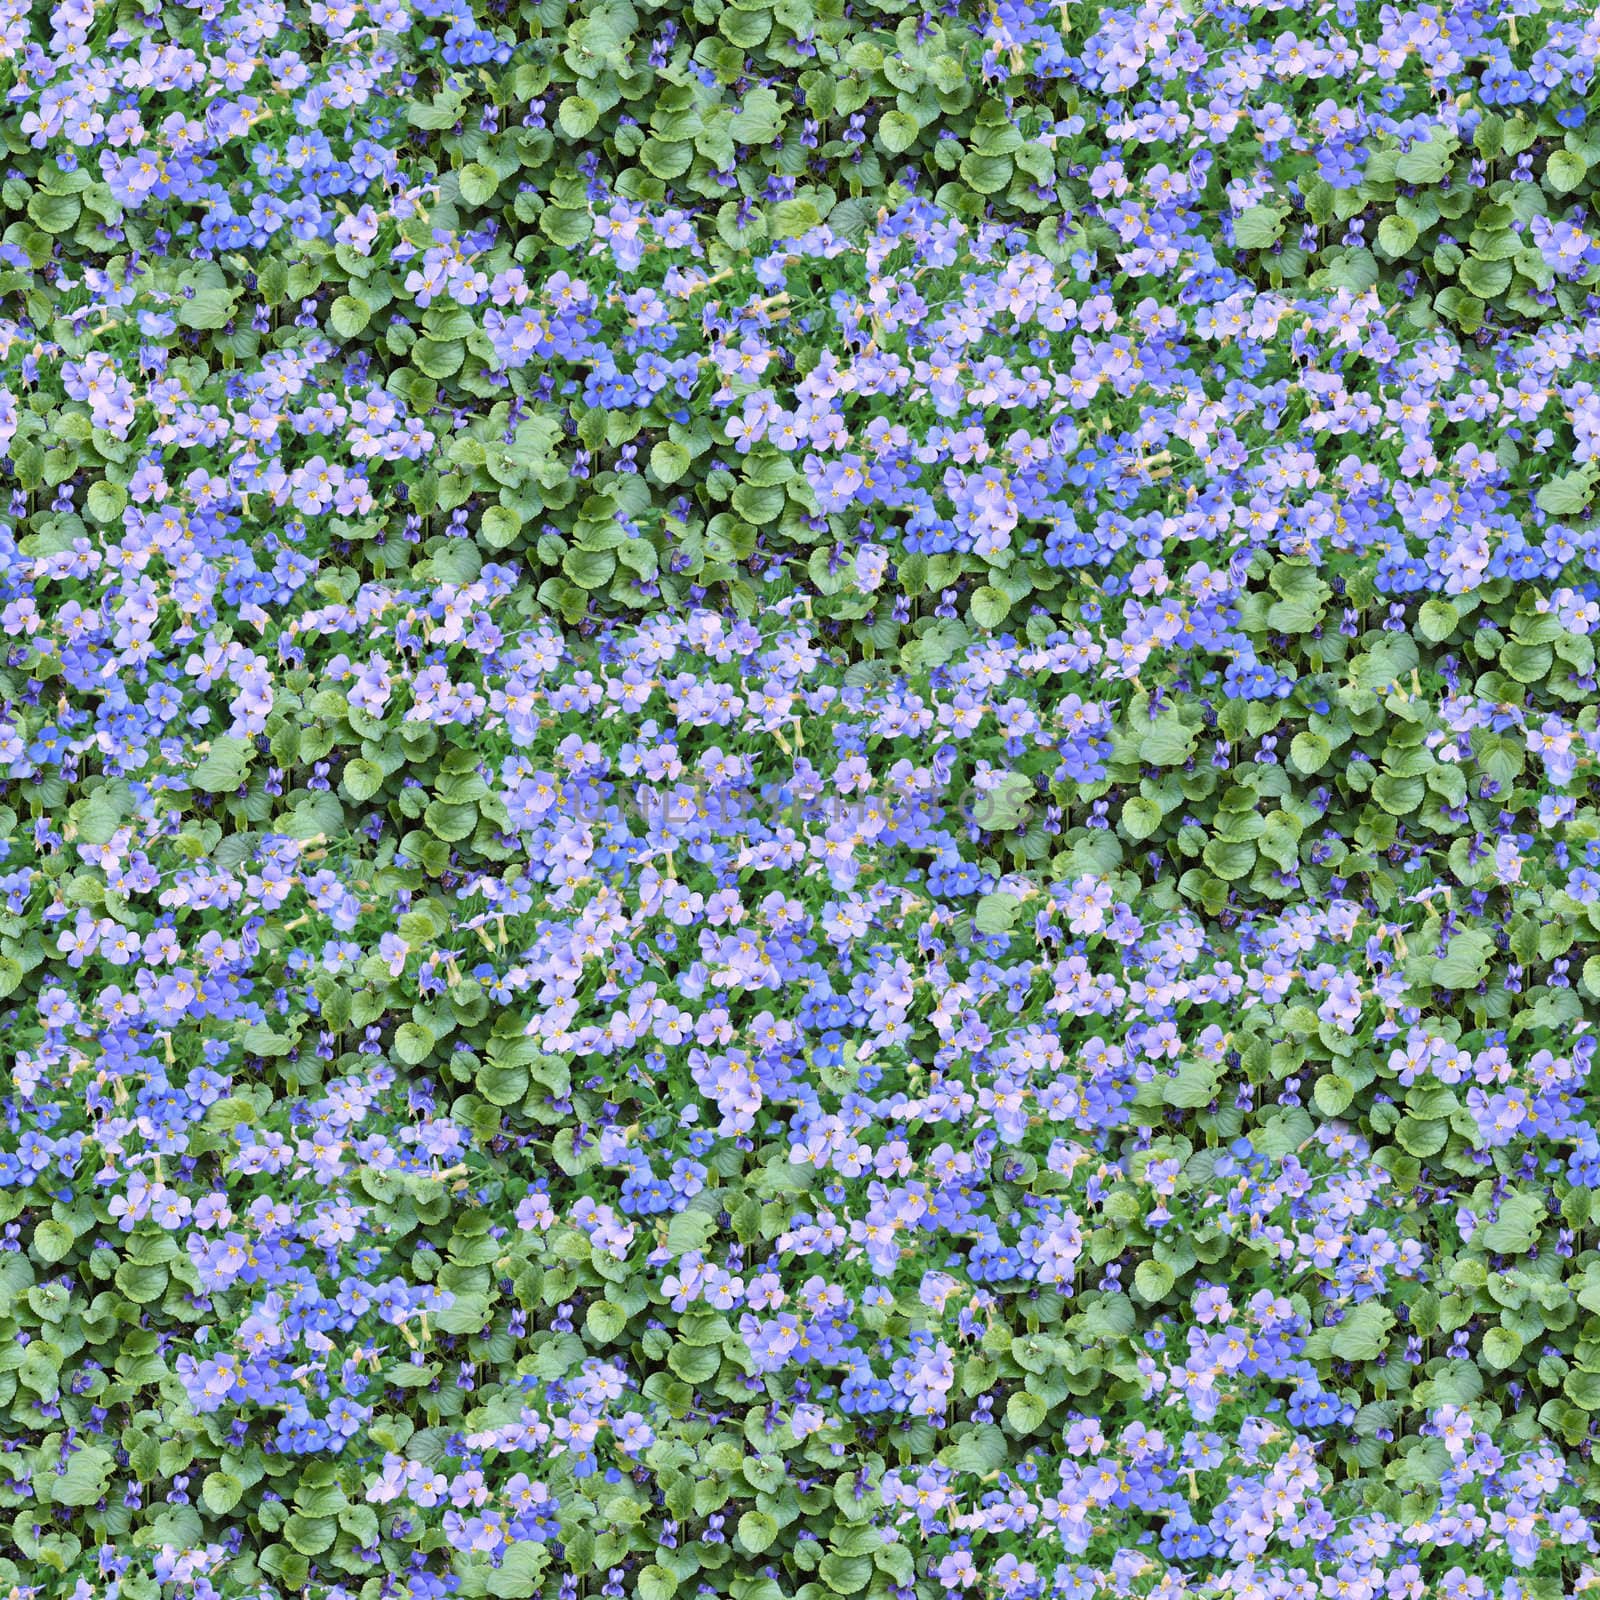 Seamless pattern made of aubrieta and violet flowers. It's composable like tiles without visible connecting line between parts